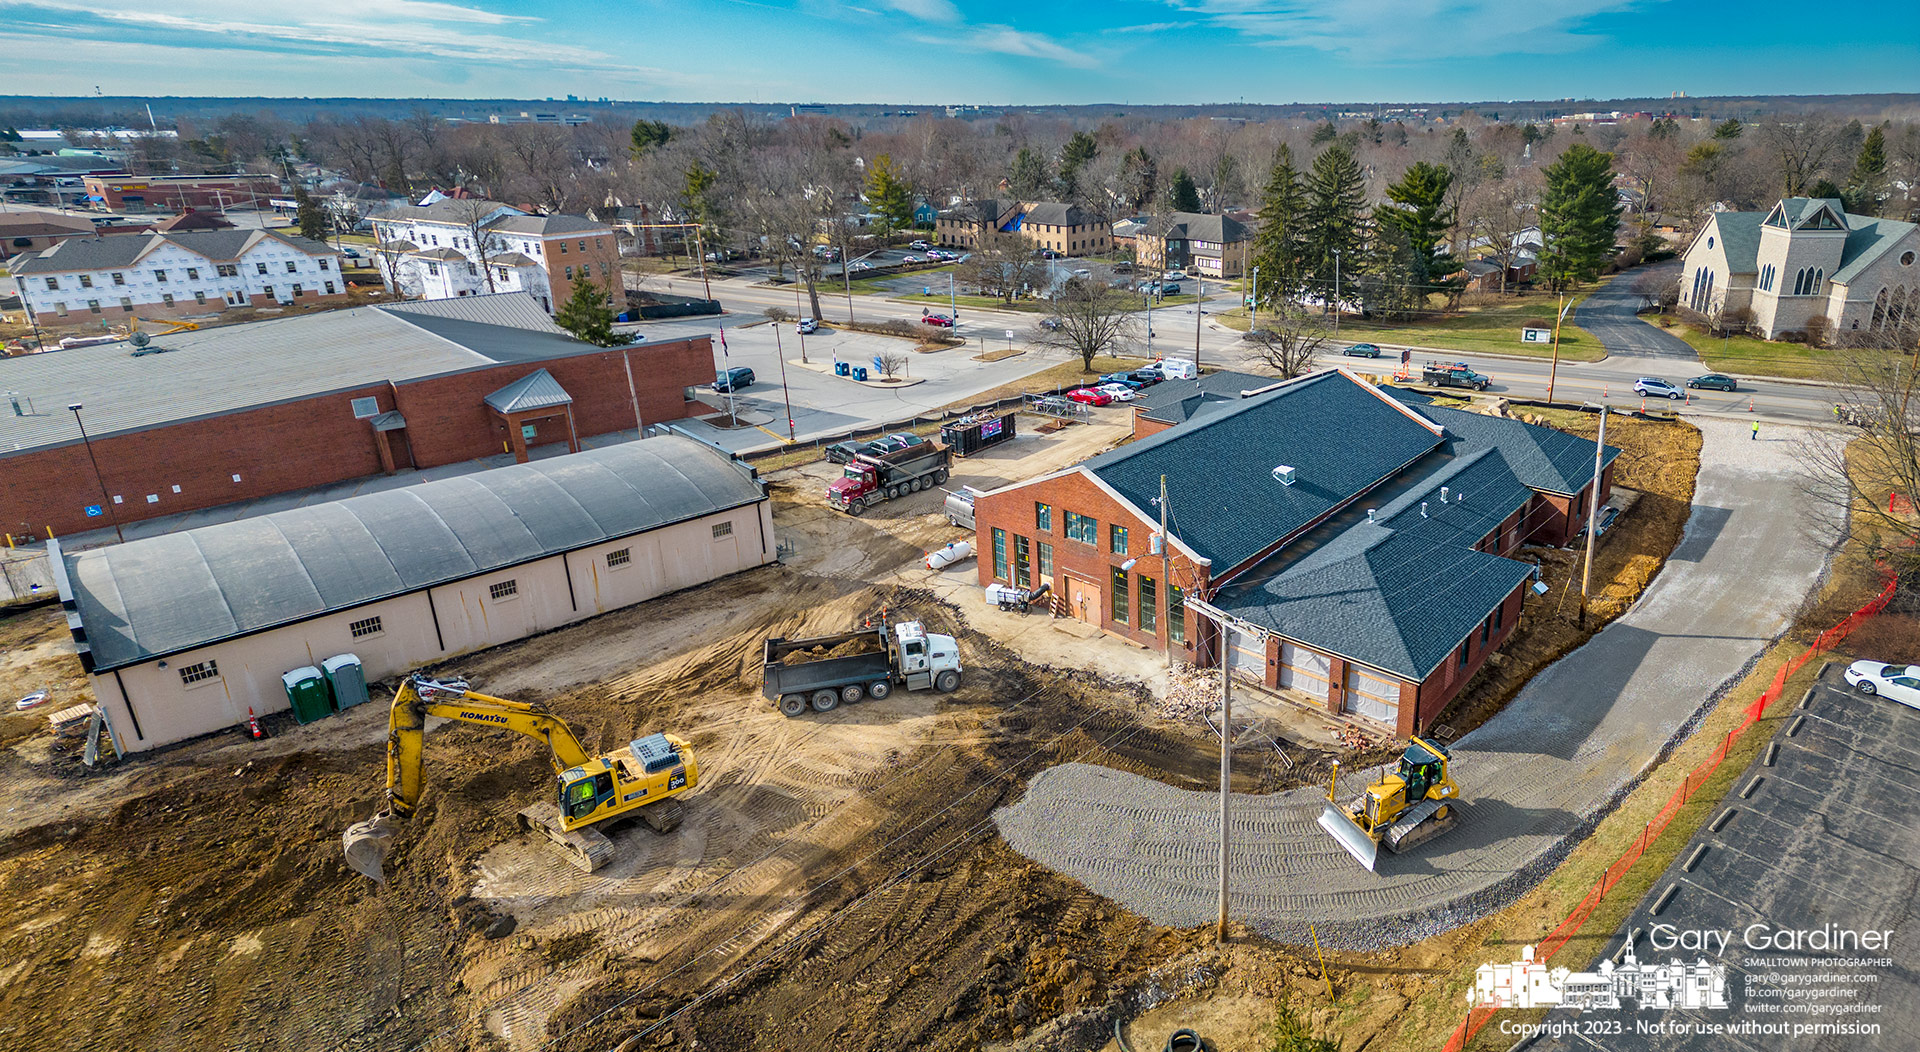 A grading crew builds a new entrance to the old Westerville Armory where CoHatch is building an office center and North Hgh Brewing is expanding its brewery operation into the old warehouse beside what will be the new concrete parking lot. My Final Photo for February 13, 2023.